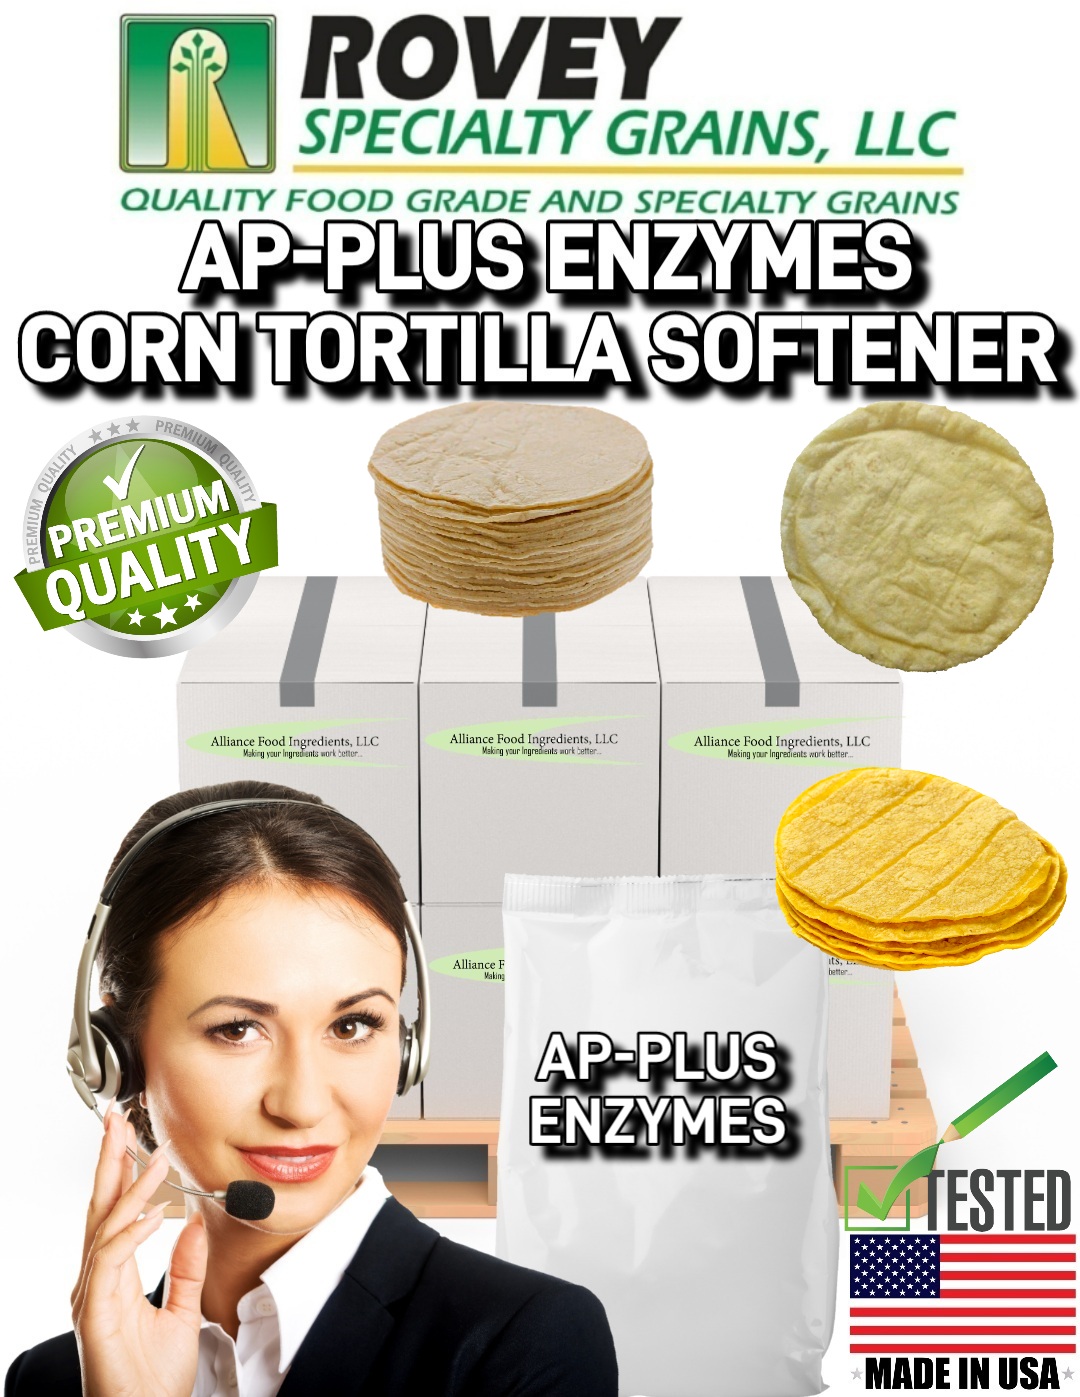 AP-PLUS-ENZYMES is a corn tortilla softener with enzymes made by Alliance food ingredients to improve hydrating capacity, softness and strengthens the tortillas with freeze thaw stability in stock for immediate shipping in stock for immediate shipping. Call Rovey Specialty Grains, LLC. at 217-227-4541. Hablamos Español. Rovey Specialty Grains, LLC. "Quality Ingredients, Quality Tortillas" www.roveyseed.com